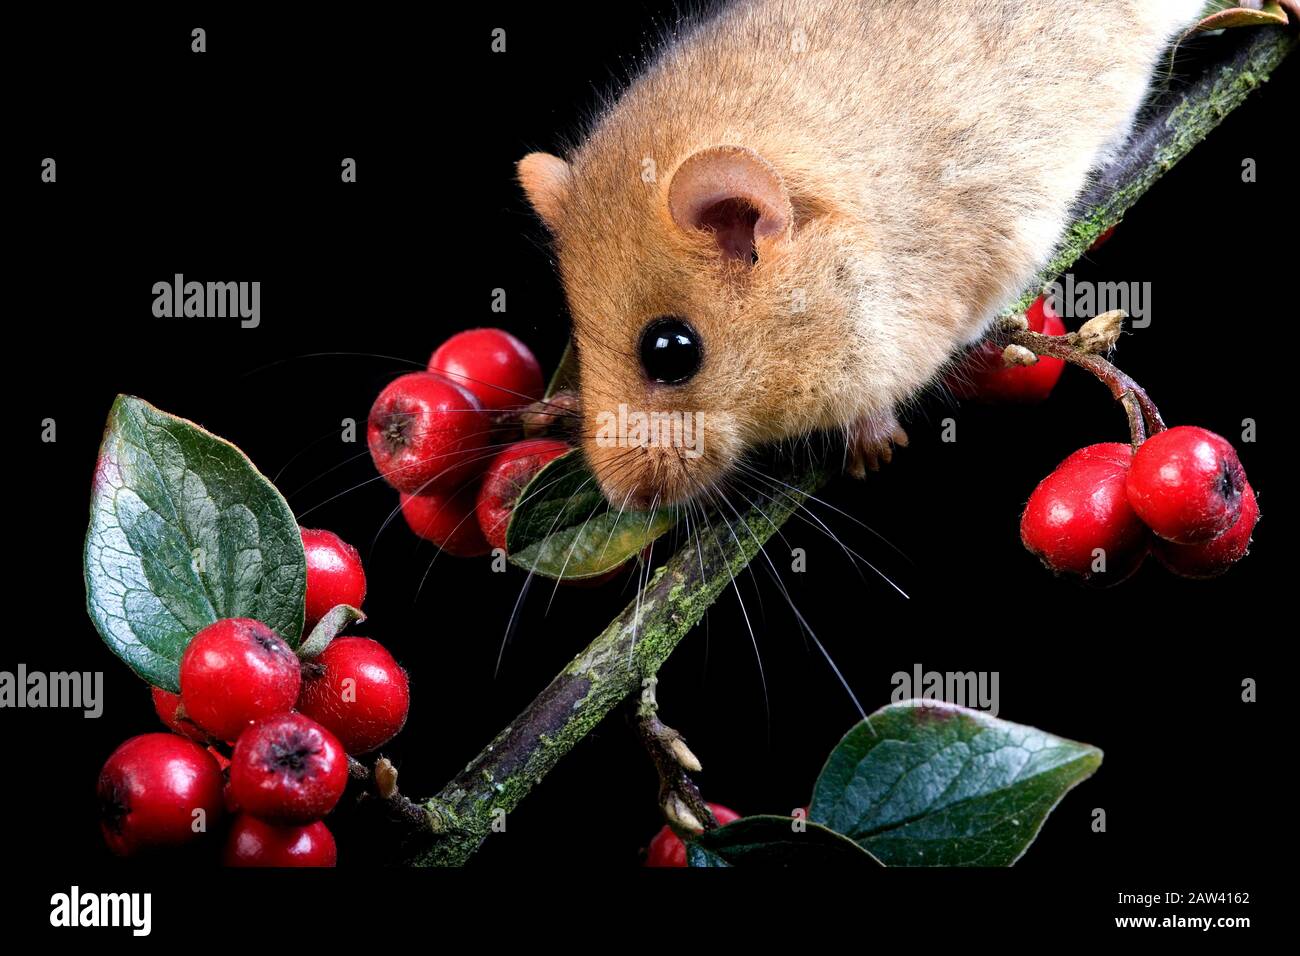 Common Dormouse, muscardinus avellanarius, Adult standing on Branch with Berries, Normandy Stock Photo